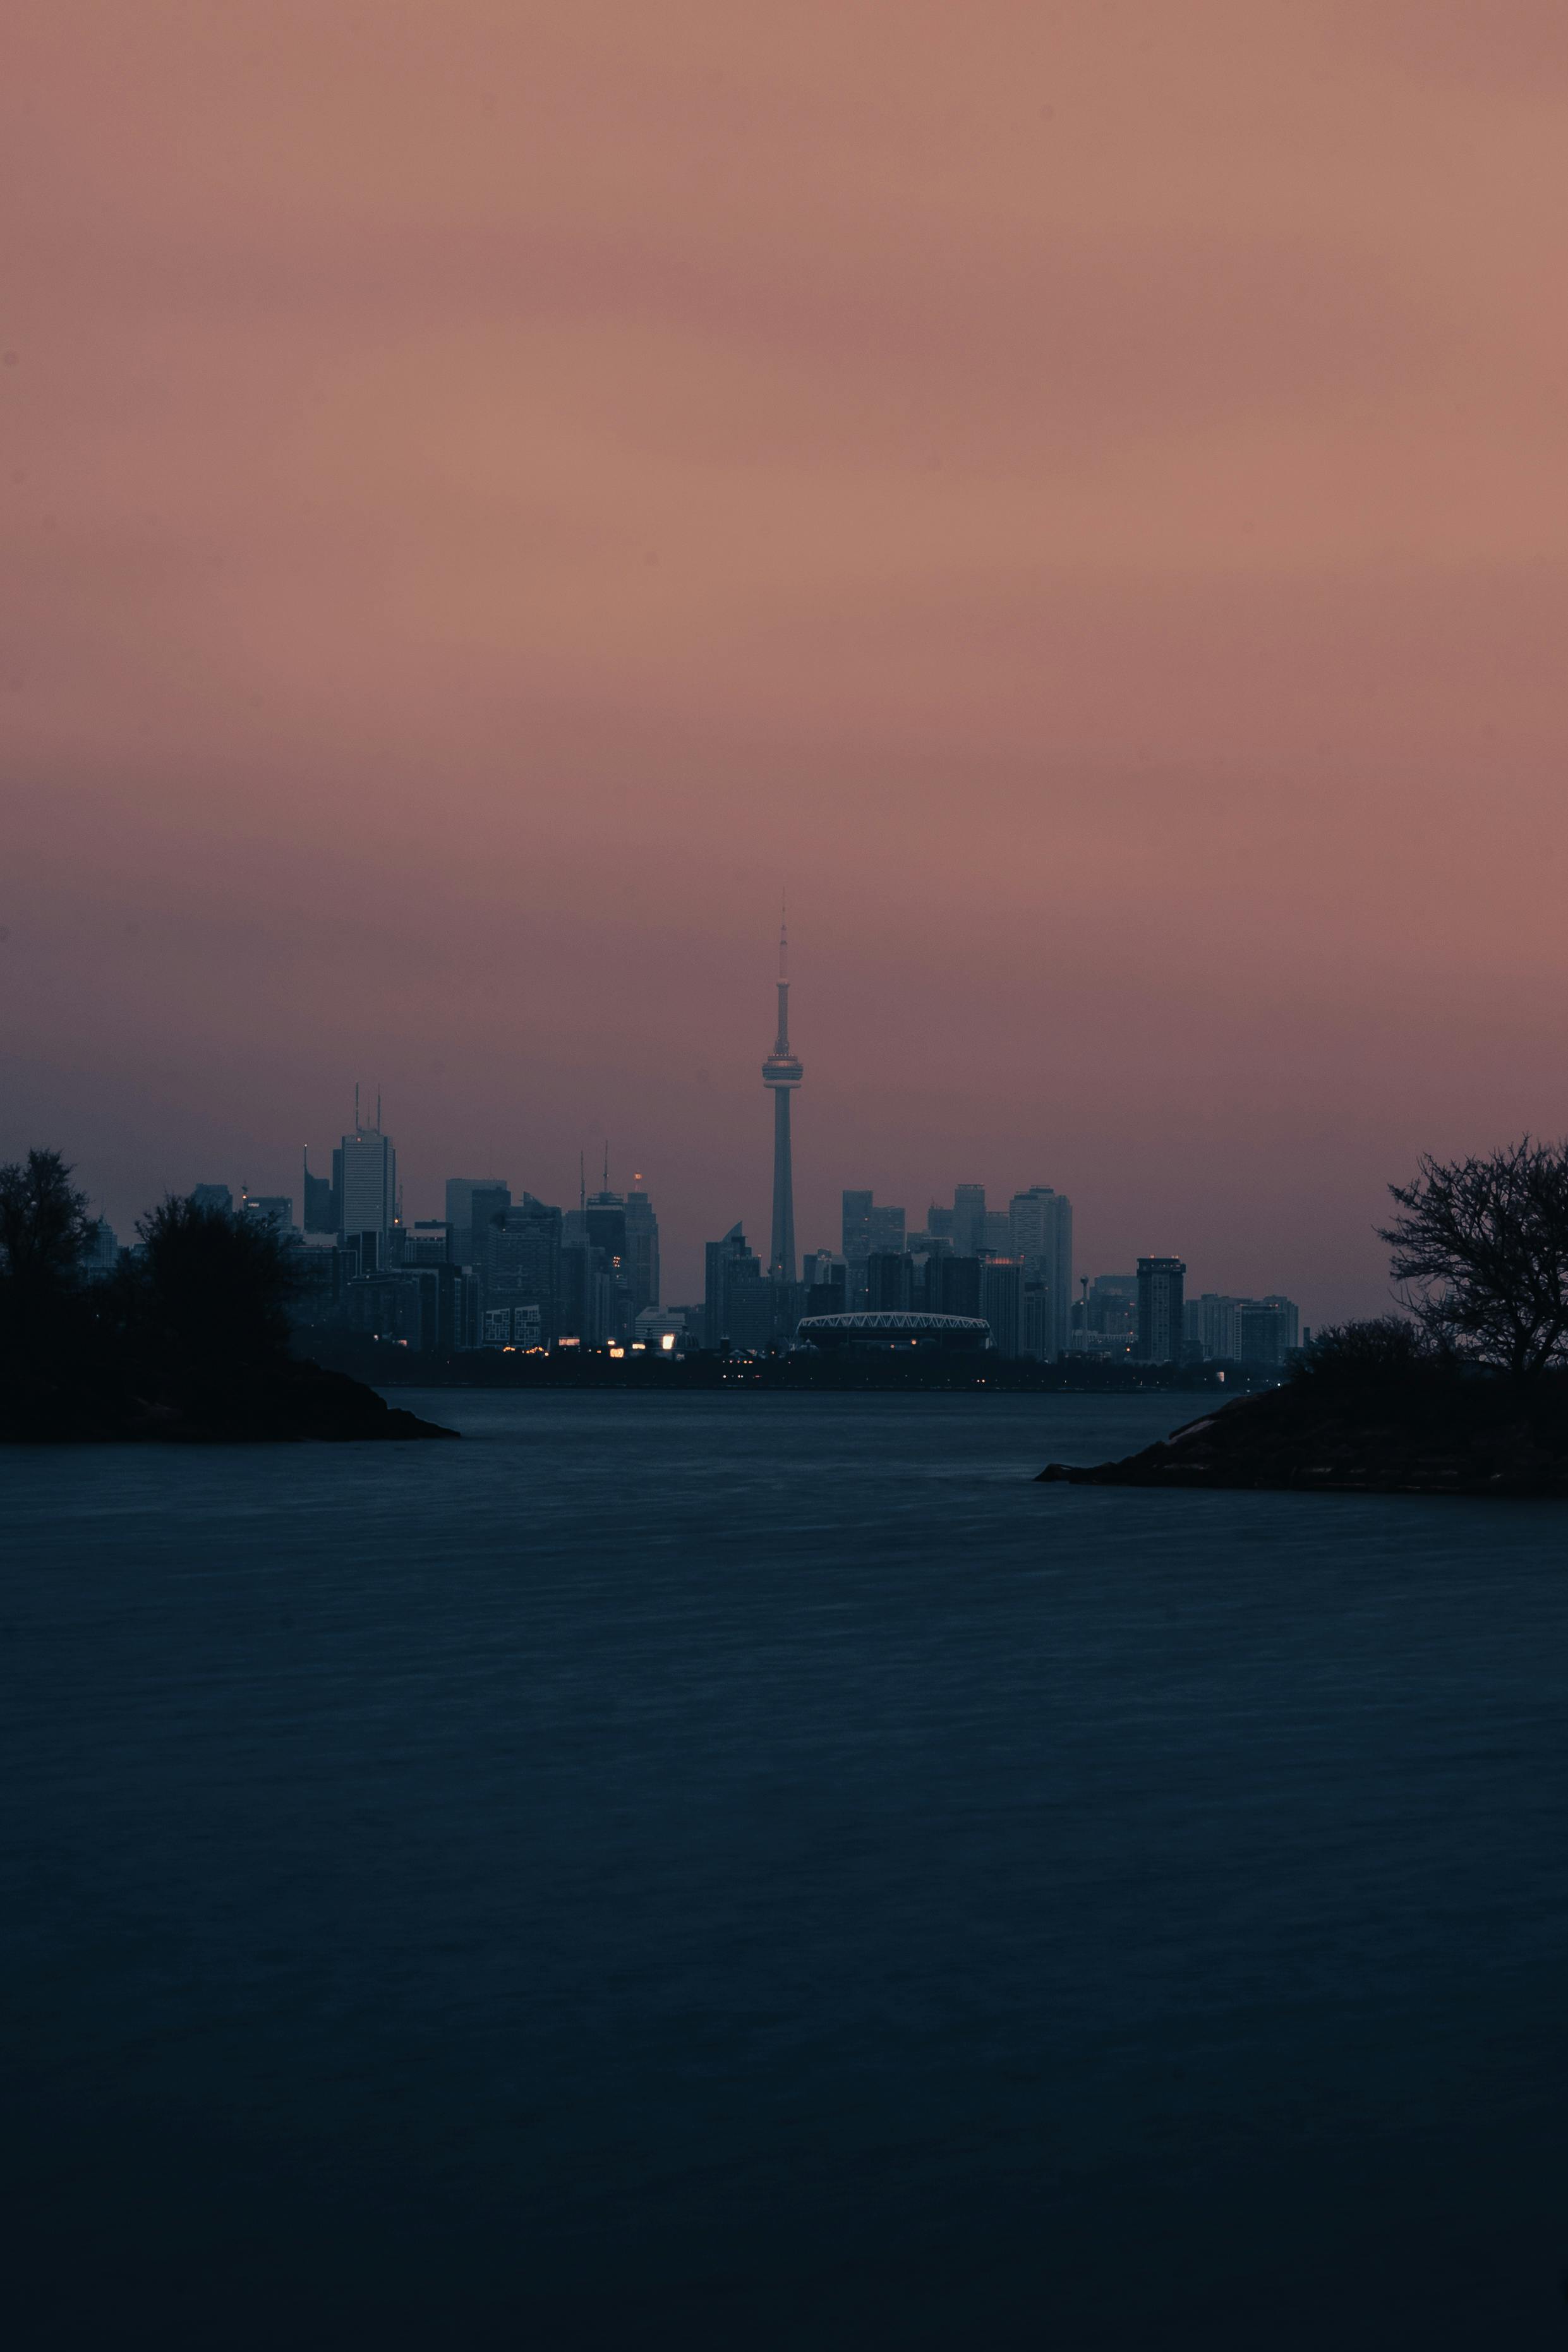 Download wallpaper 240x320 moody toronto, city, cityscape, old mobile, cell  phone, smartphone, 240x320 hd image background, 22704